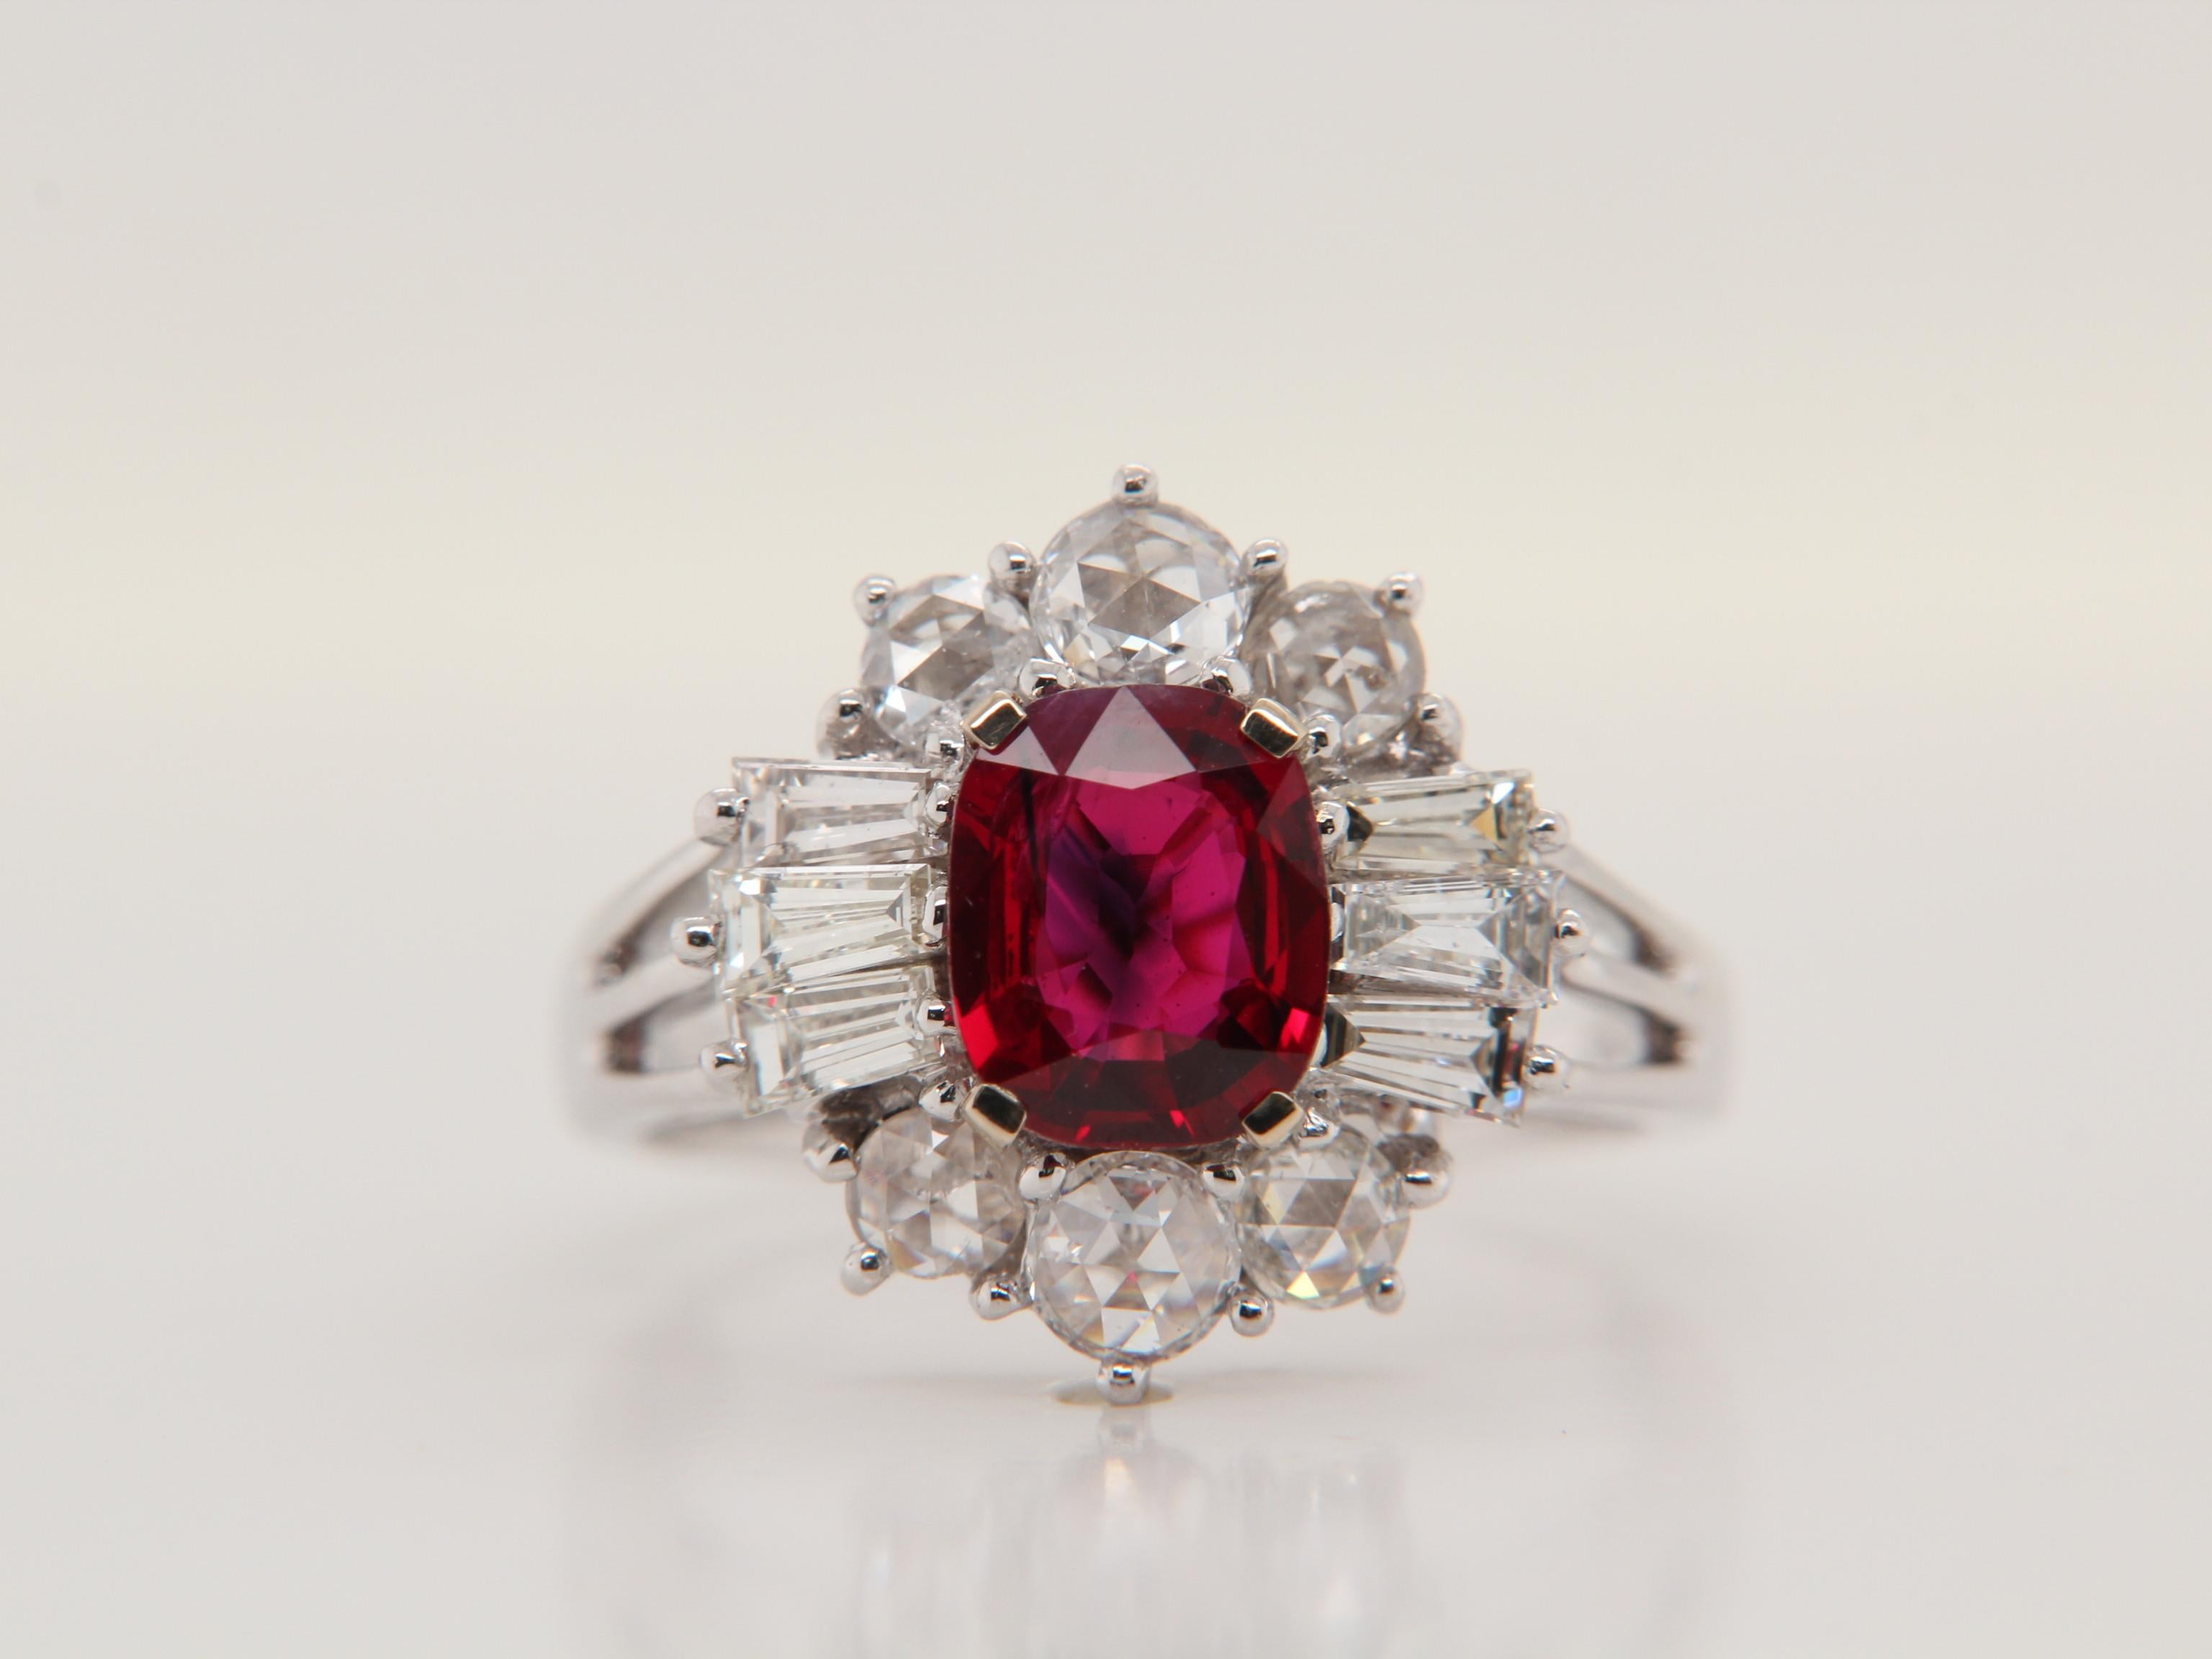 A brand new Burmese ruby and diamond ring by Rewa Jewelry. The mounting is handmade in 18 Karat white gold and set with a 1.38 Carat ruby in the center. The ruby is certified by Gem Research Swisslab as natural, 'Pigeon Blood', and without any heat